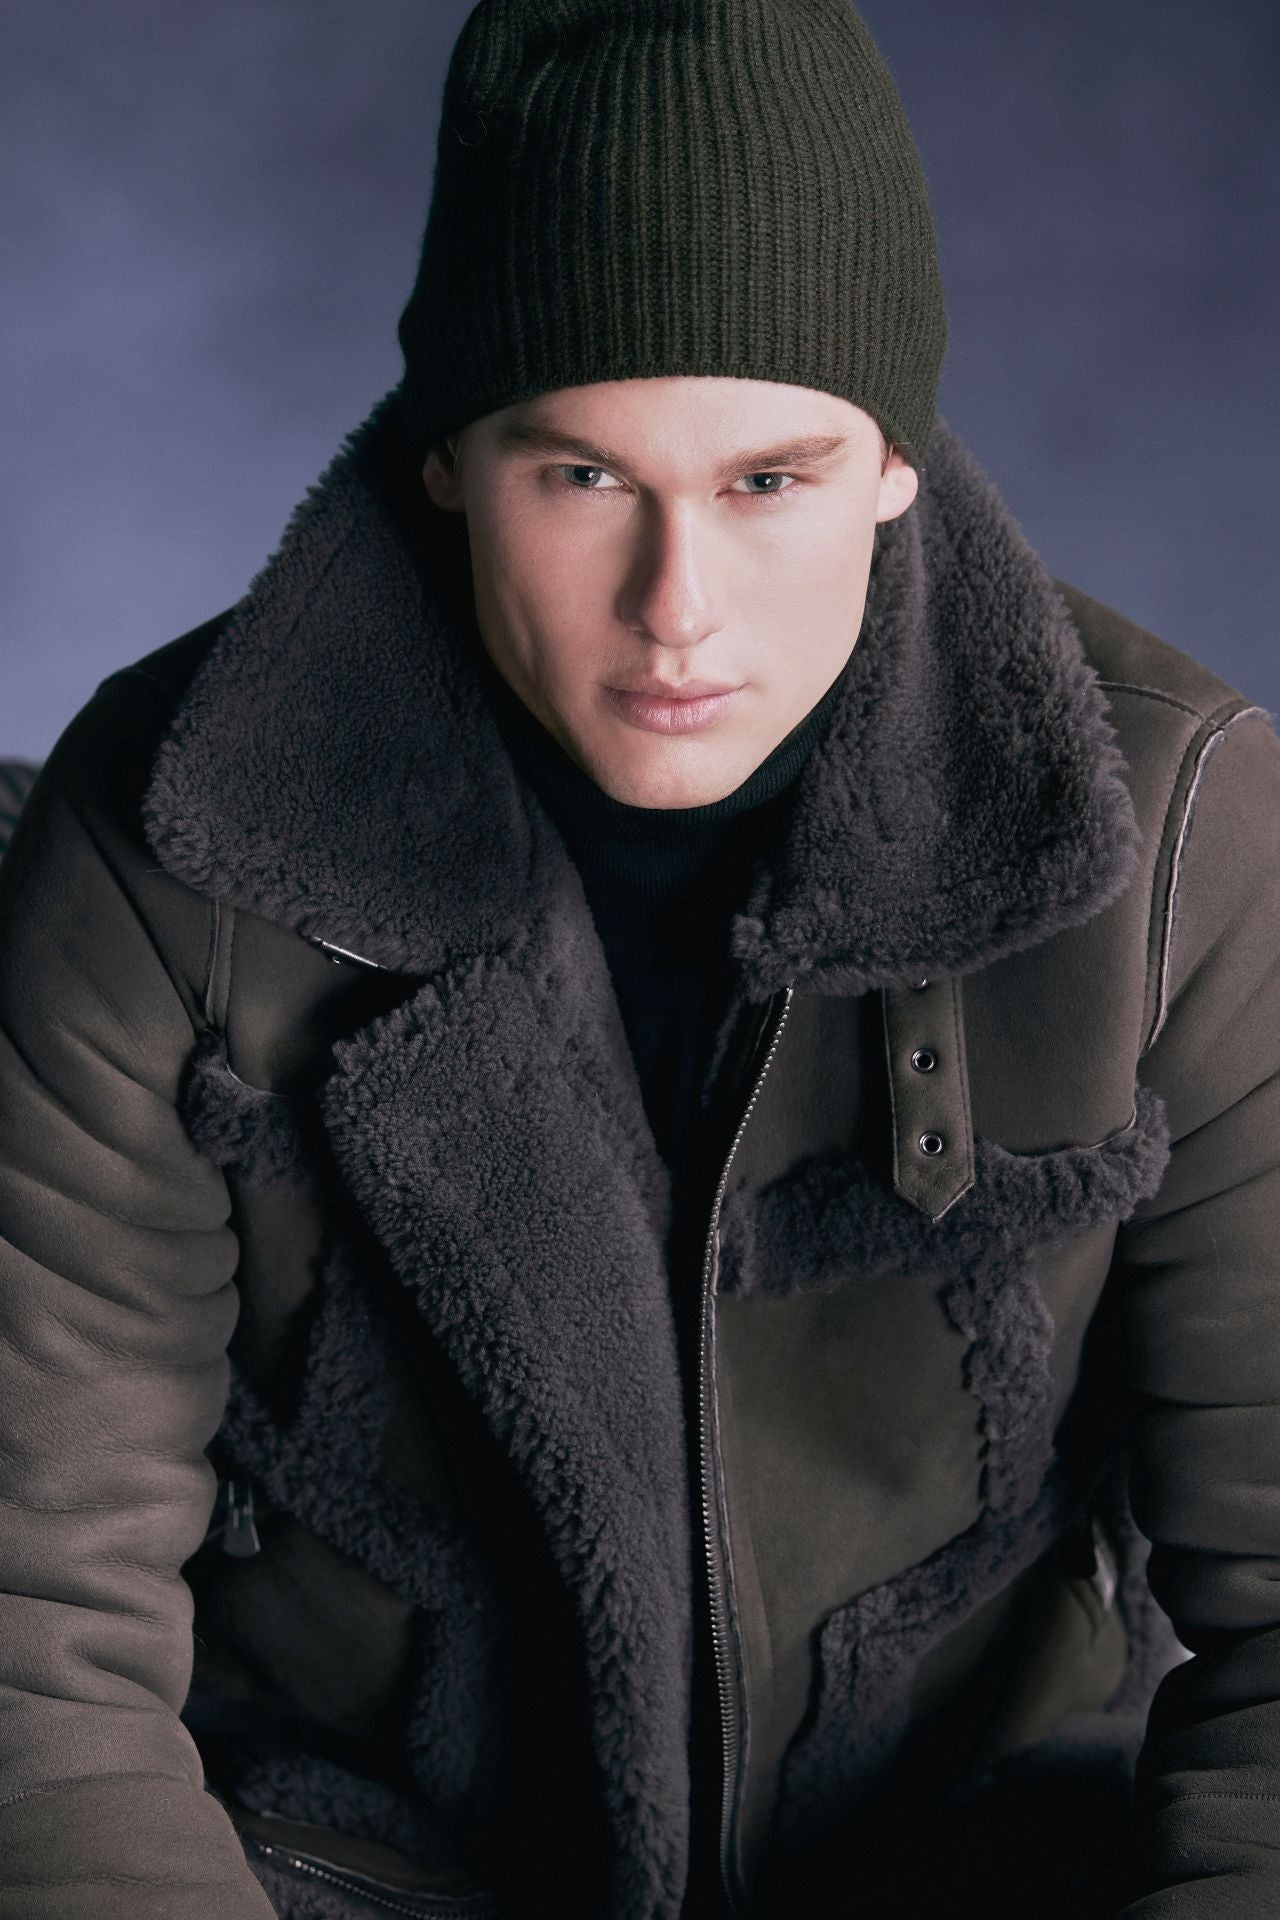 Discover Umberto, our designer mens shearling moto jacket with contrast curly wool out detail. True to size and featuring a standard zip closure, it exudes urban sophistication. With a spread collar adorned with a moto buckle and an interior zip pocket, this jacket combines style and functionality for the perfect winter statement.